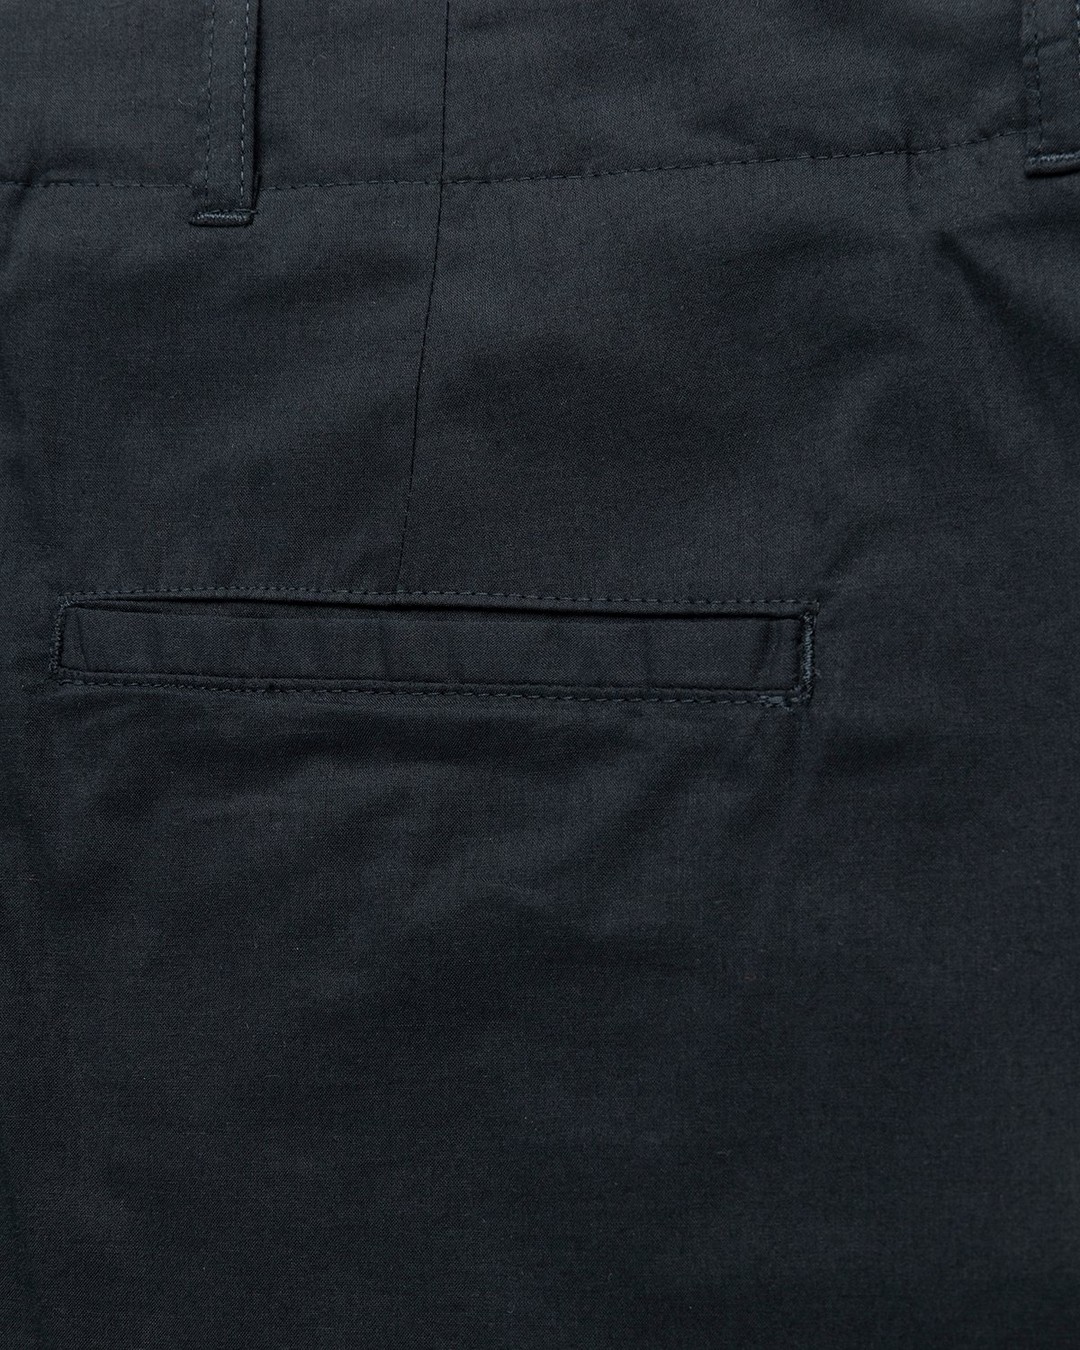 Our Legacy – Borrowed Chino Black Voile - Chinos - Black - Image 4